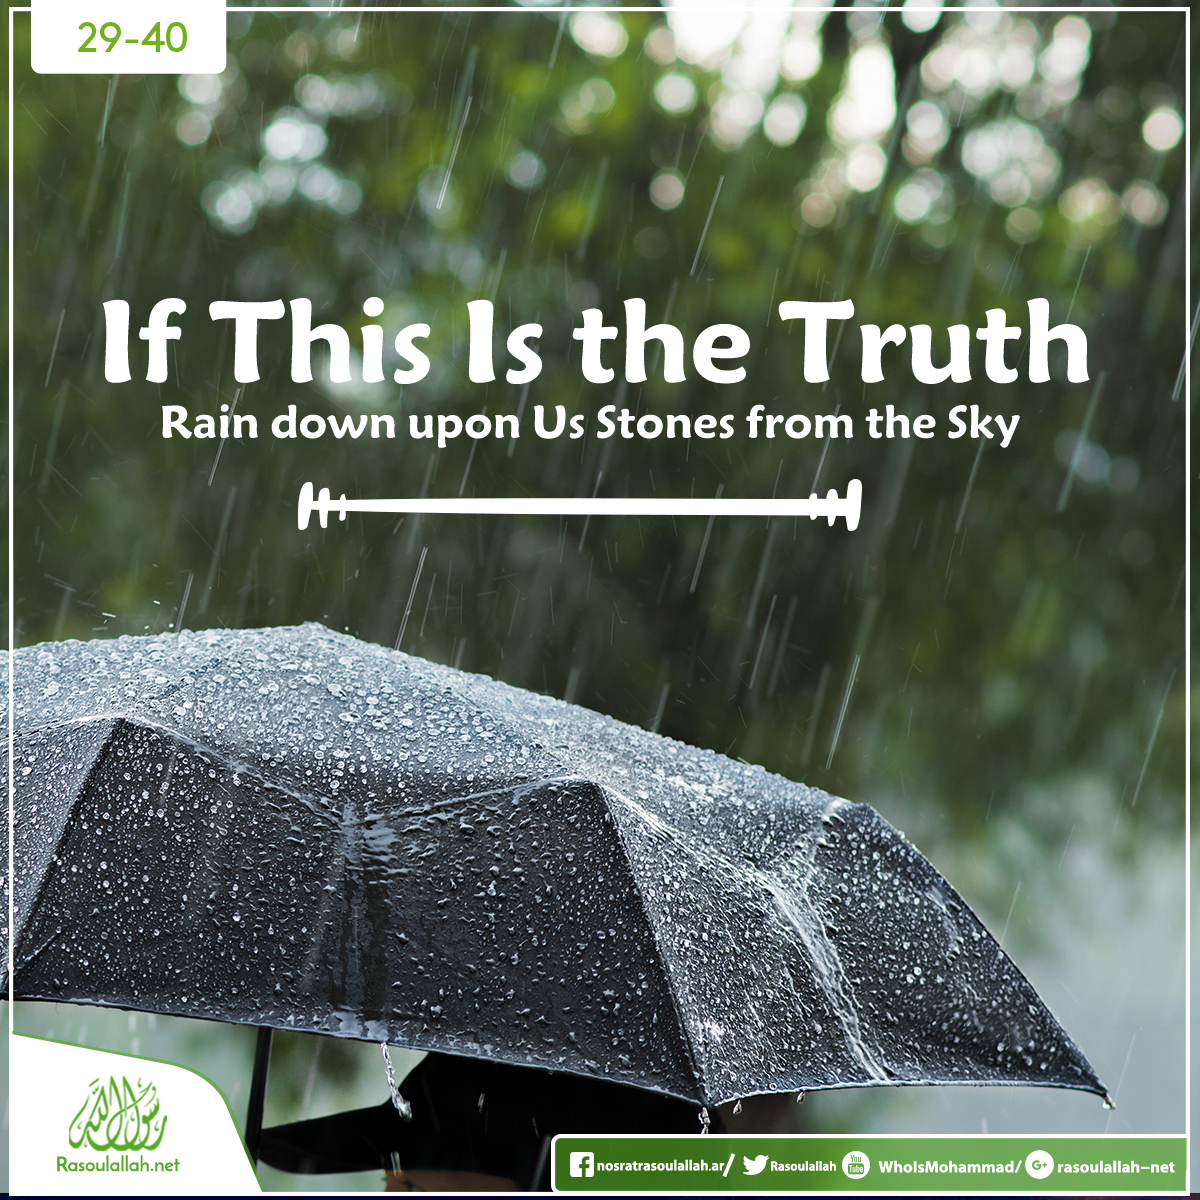 If this is the truth, rain down upon us stones from the sky! 